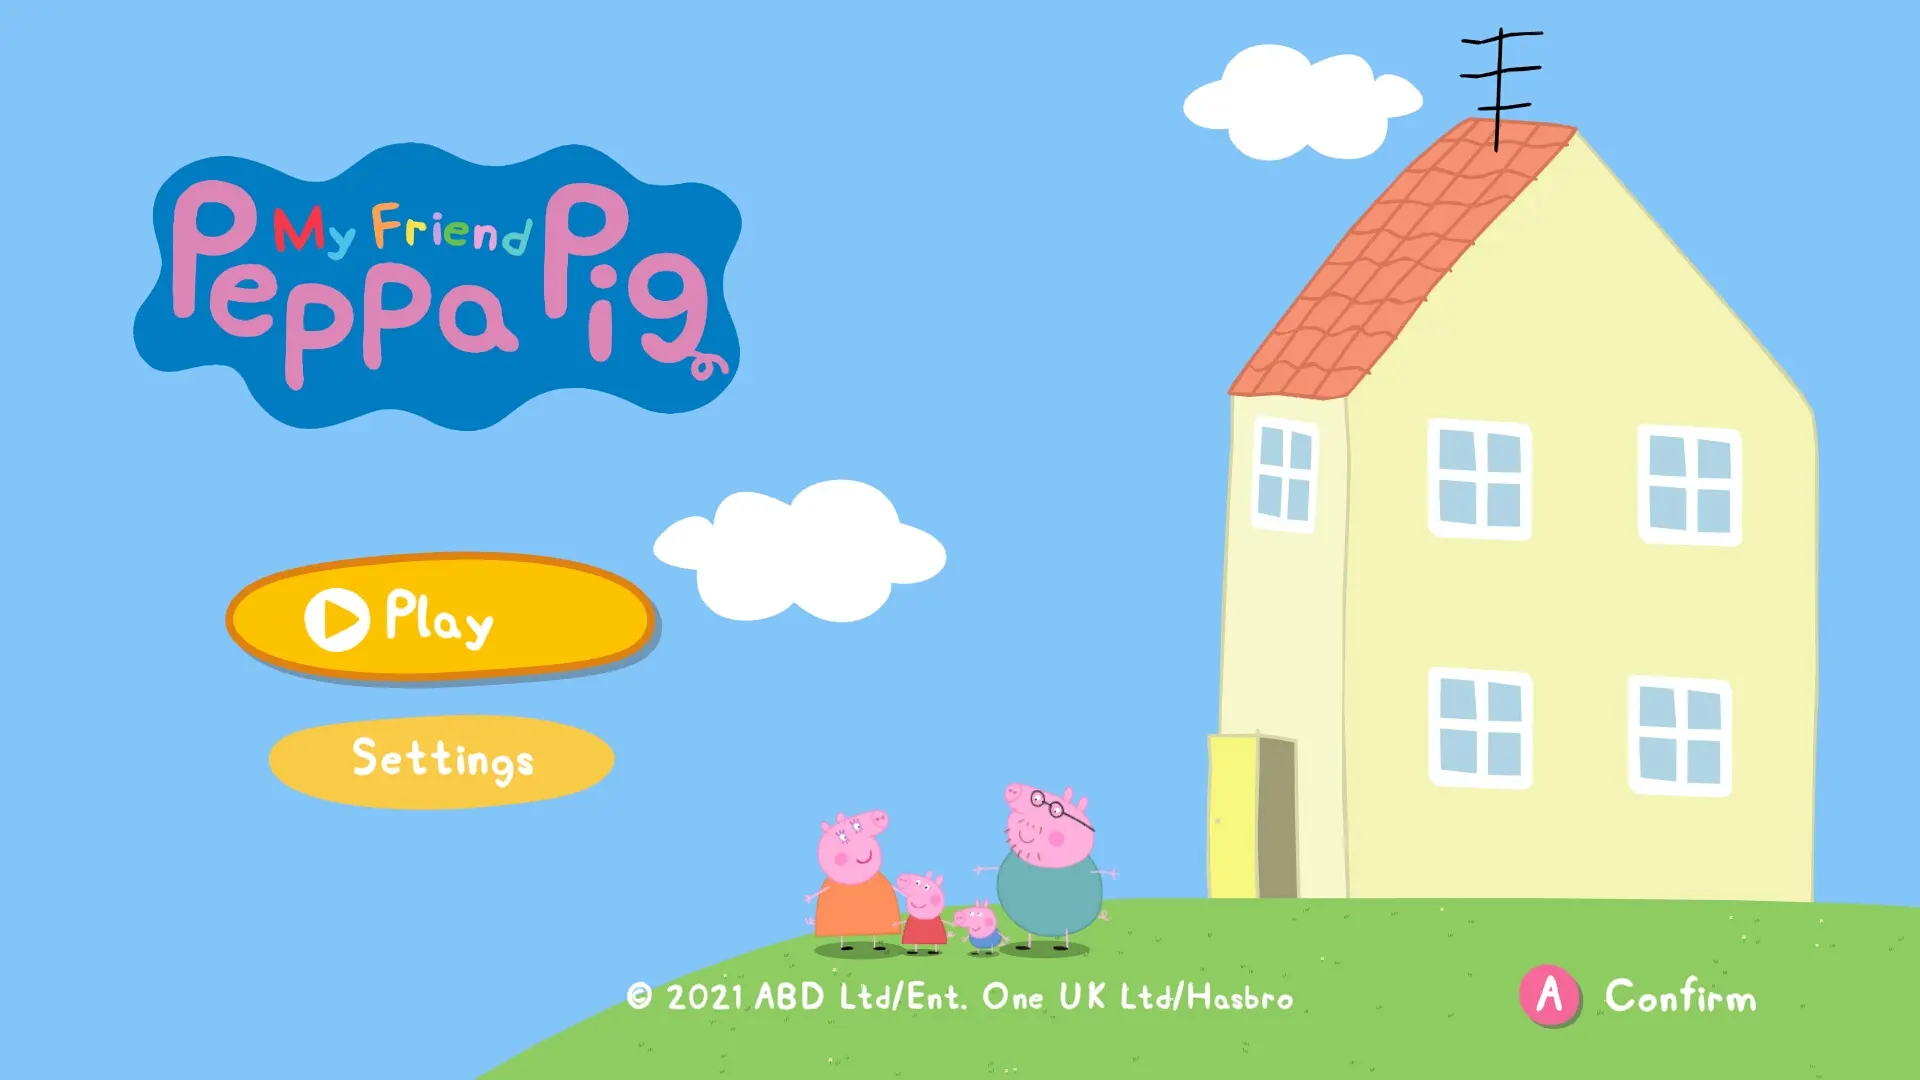 Peppa Pig Play Button